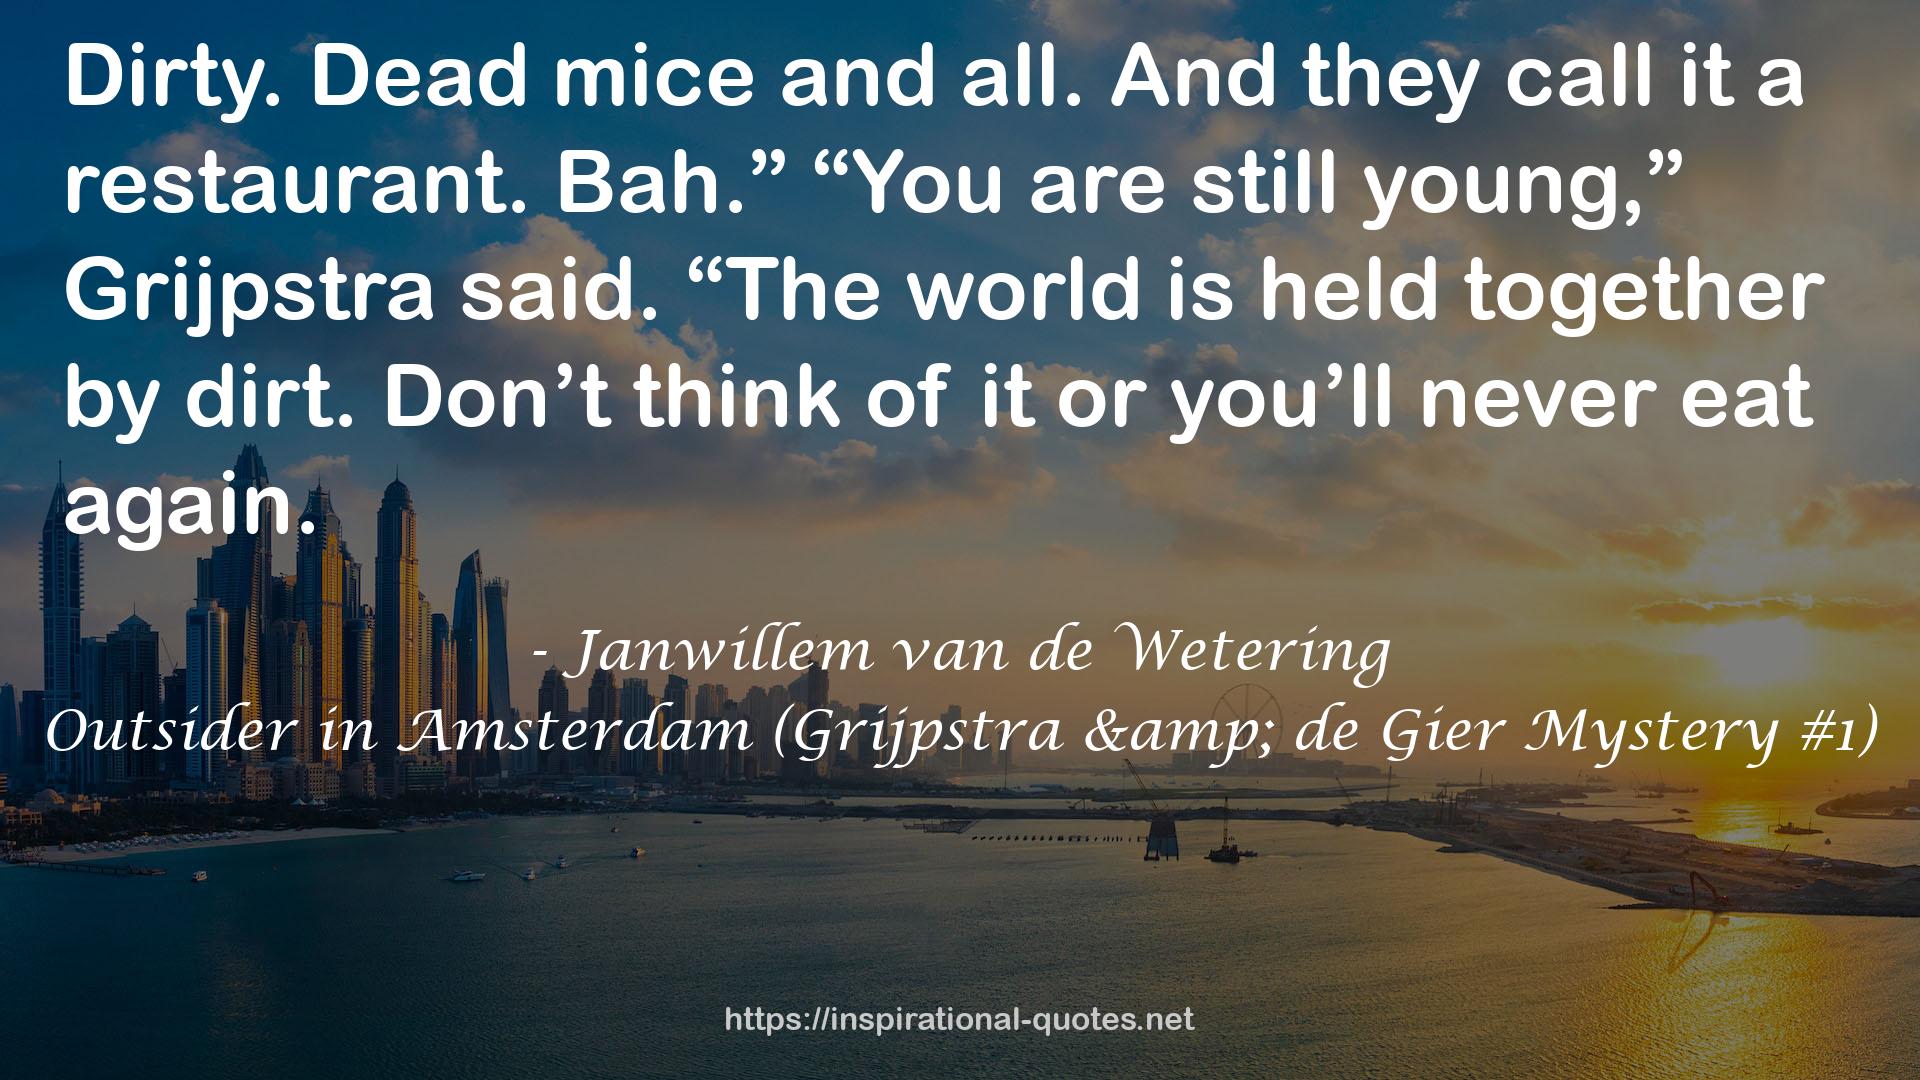 Outsider in Amsterdam (Grijpstra & de Gier Mystery #1) QUOTES